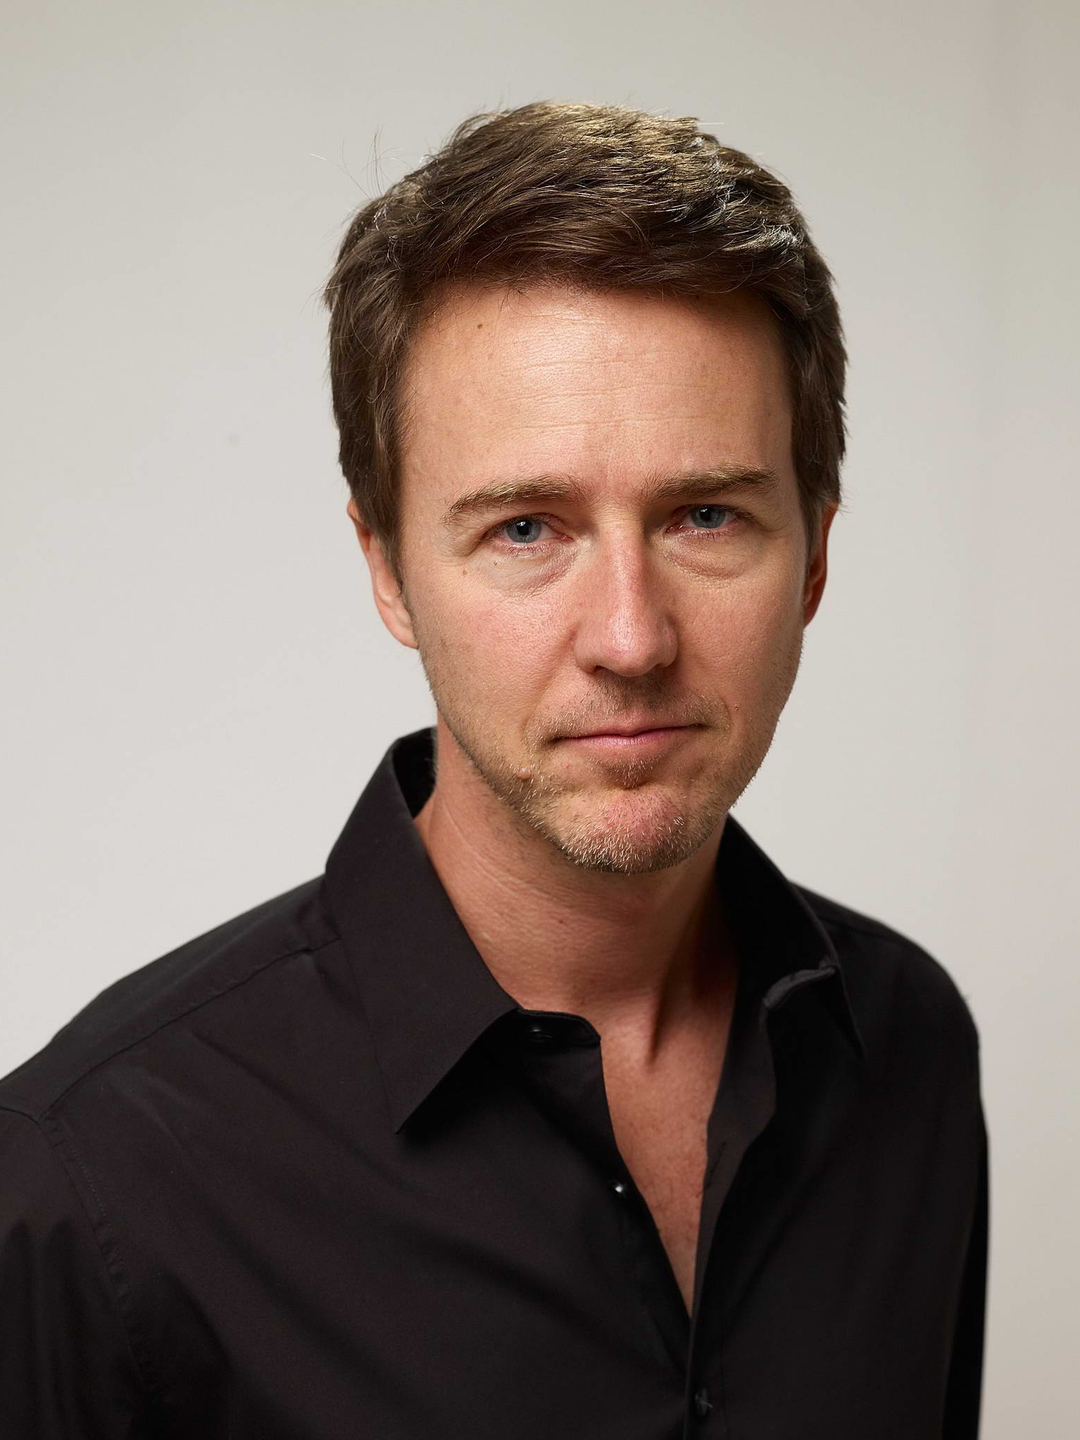 Edward Norton who is his father